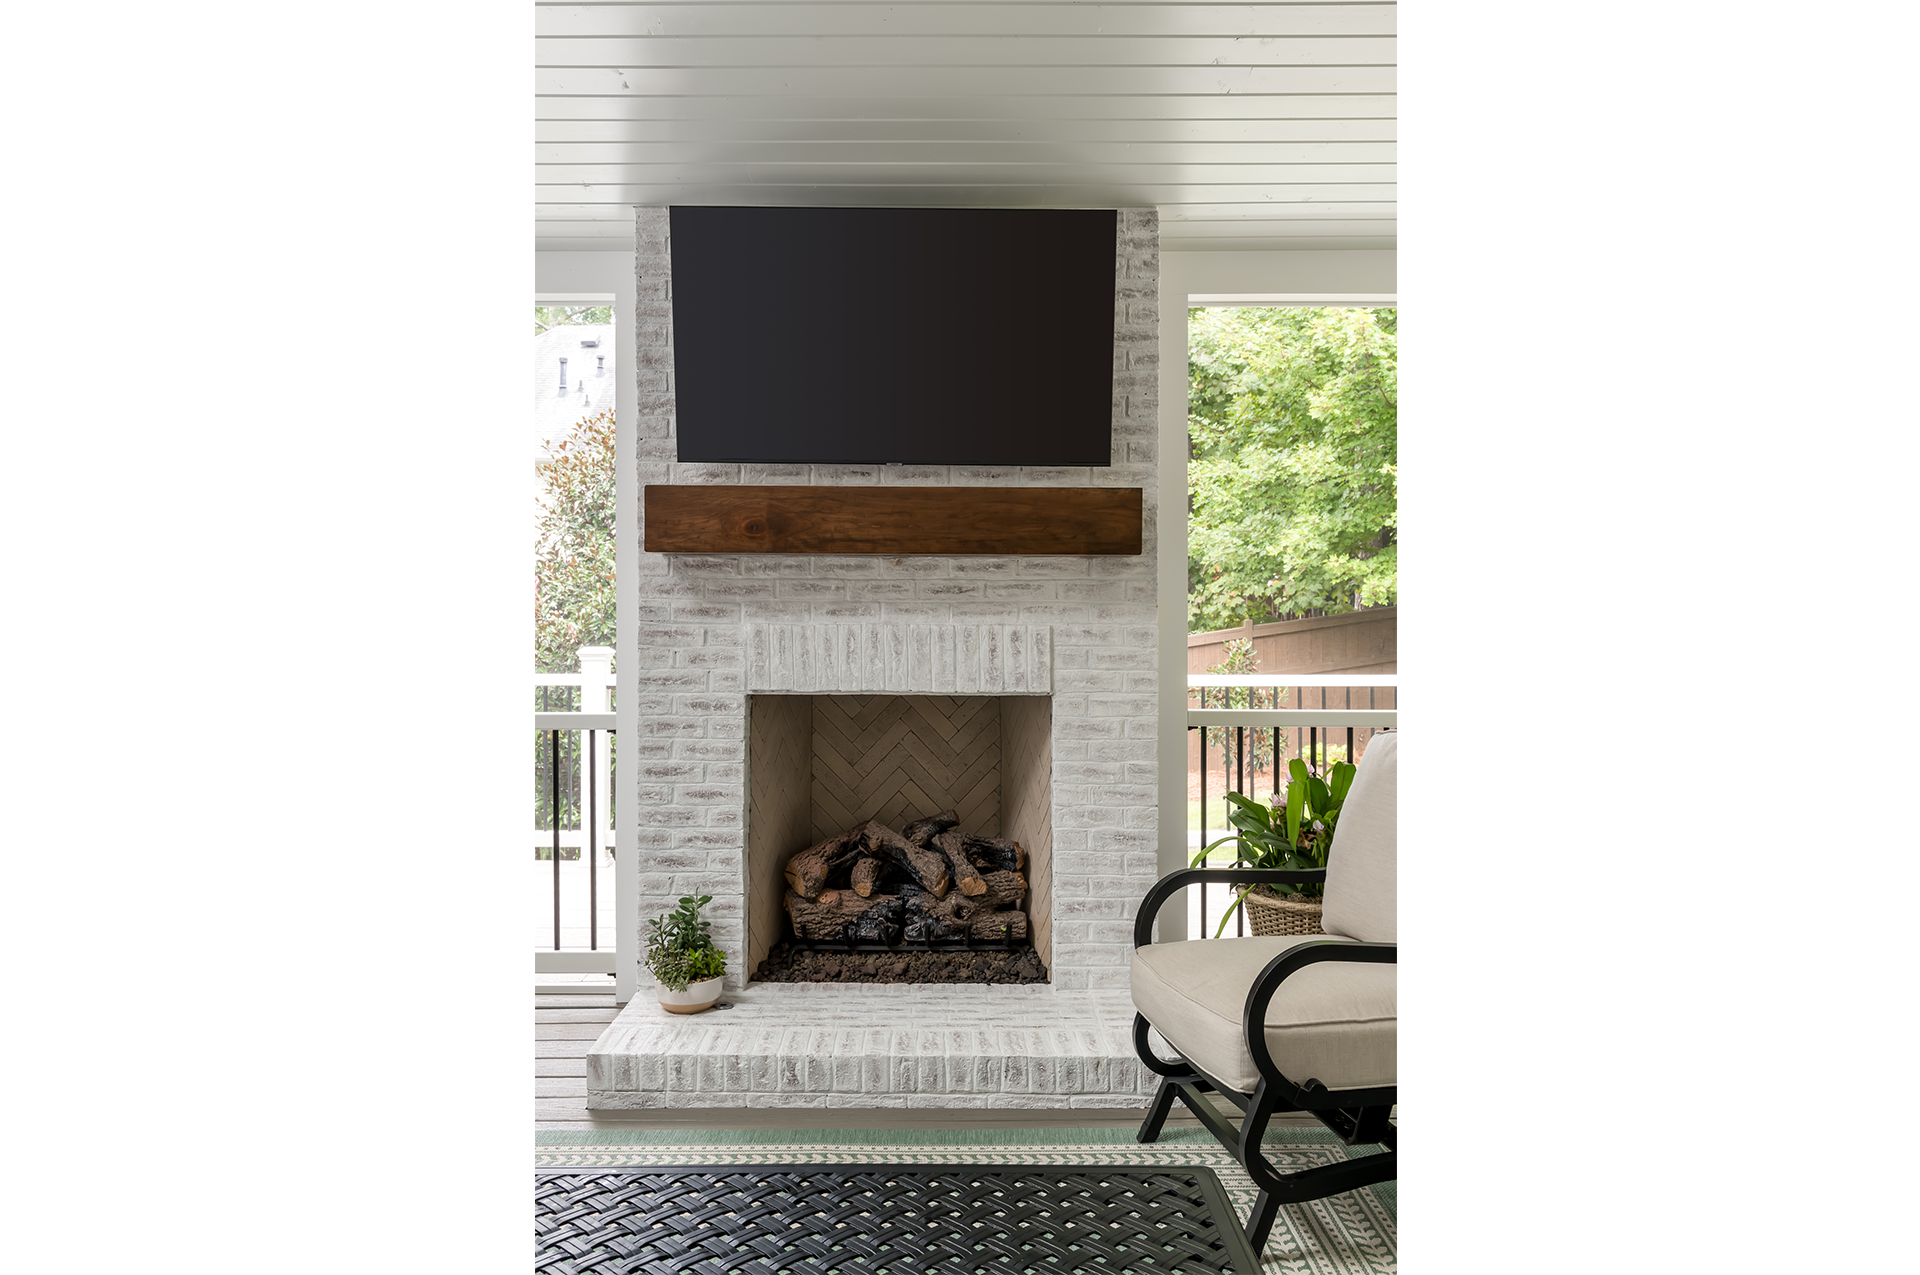 A newly remodeled screen porch with TV and fireplace